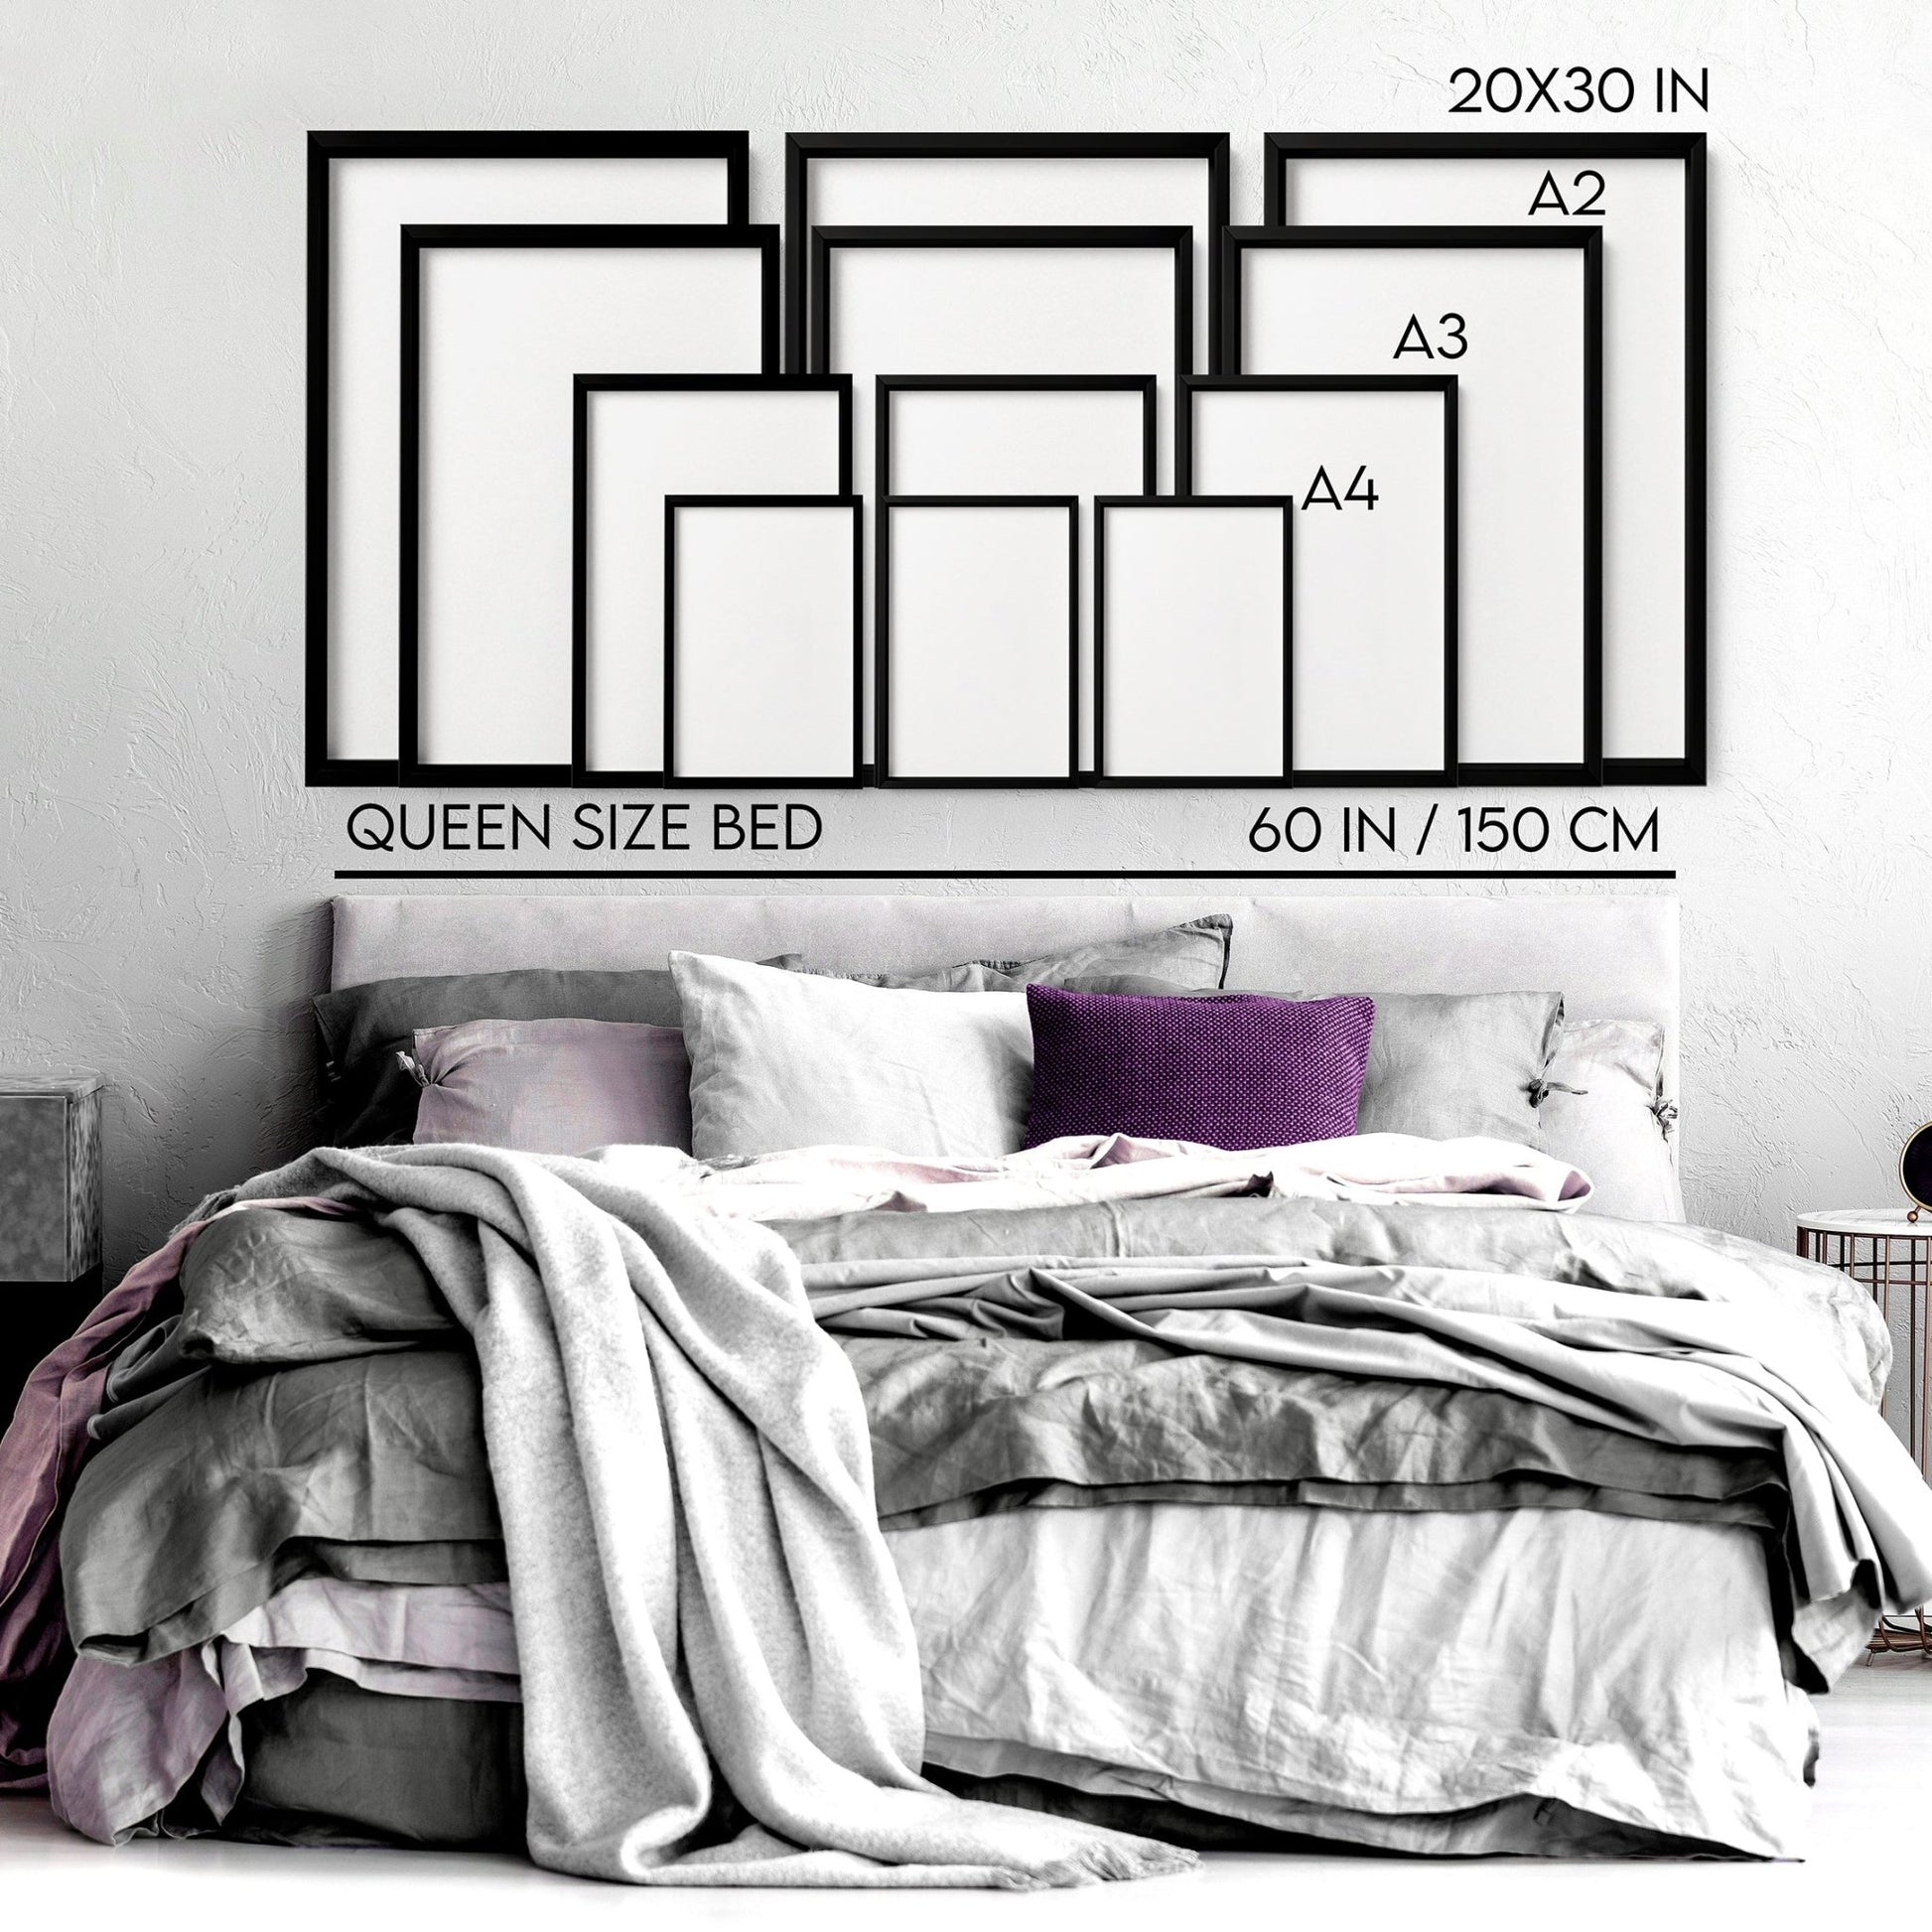 Prints for bedroom | set of 3 wall art - About Wall Art